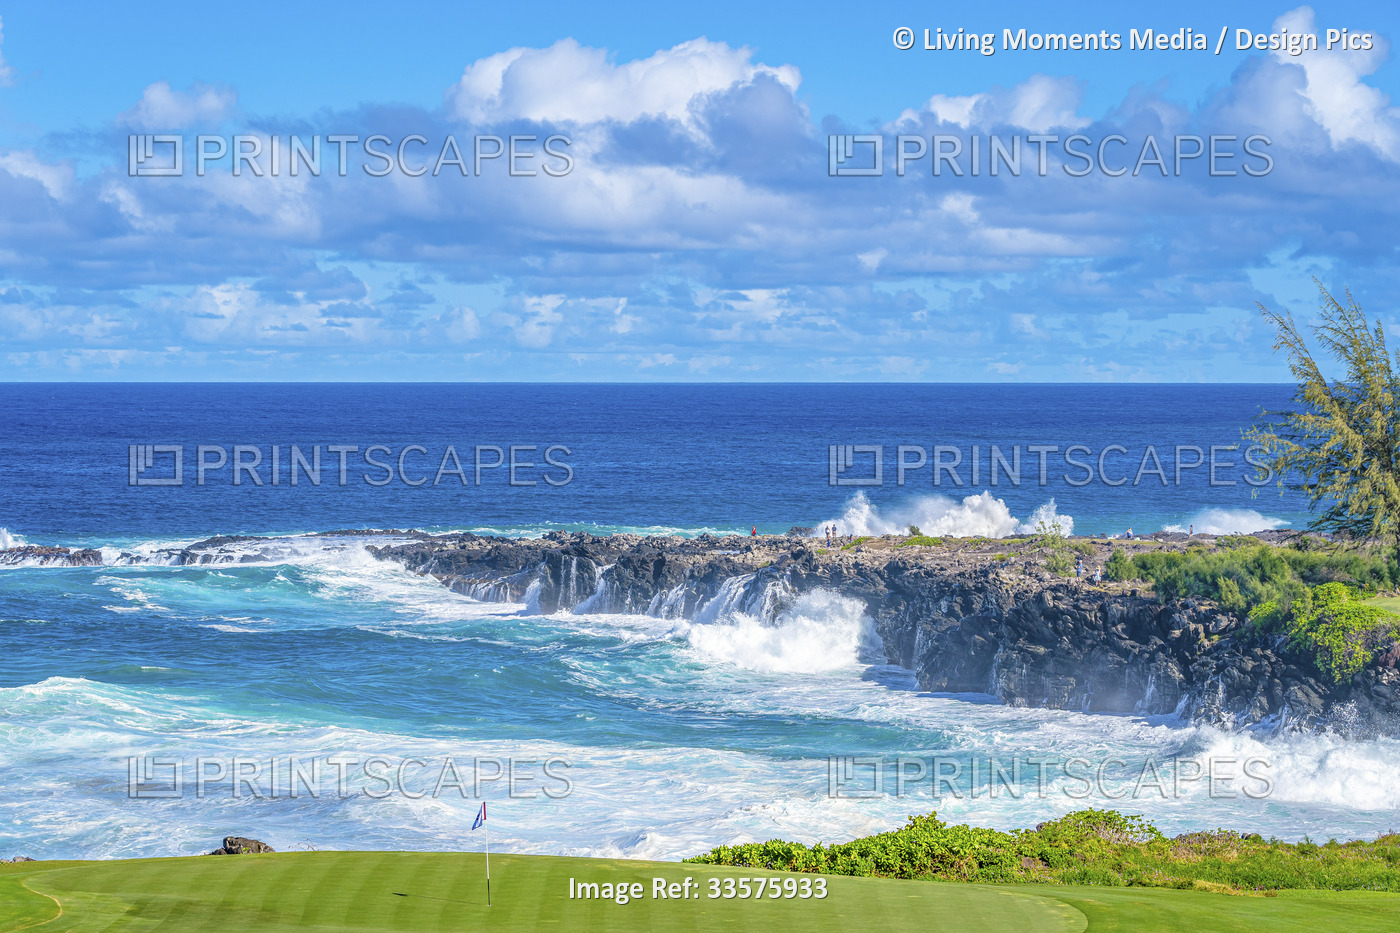 A golf course on the coast of Maui, Hawaii with the surf crashing up on the ...